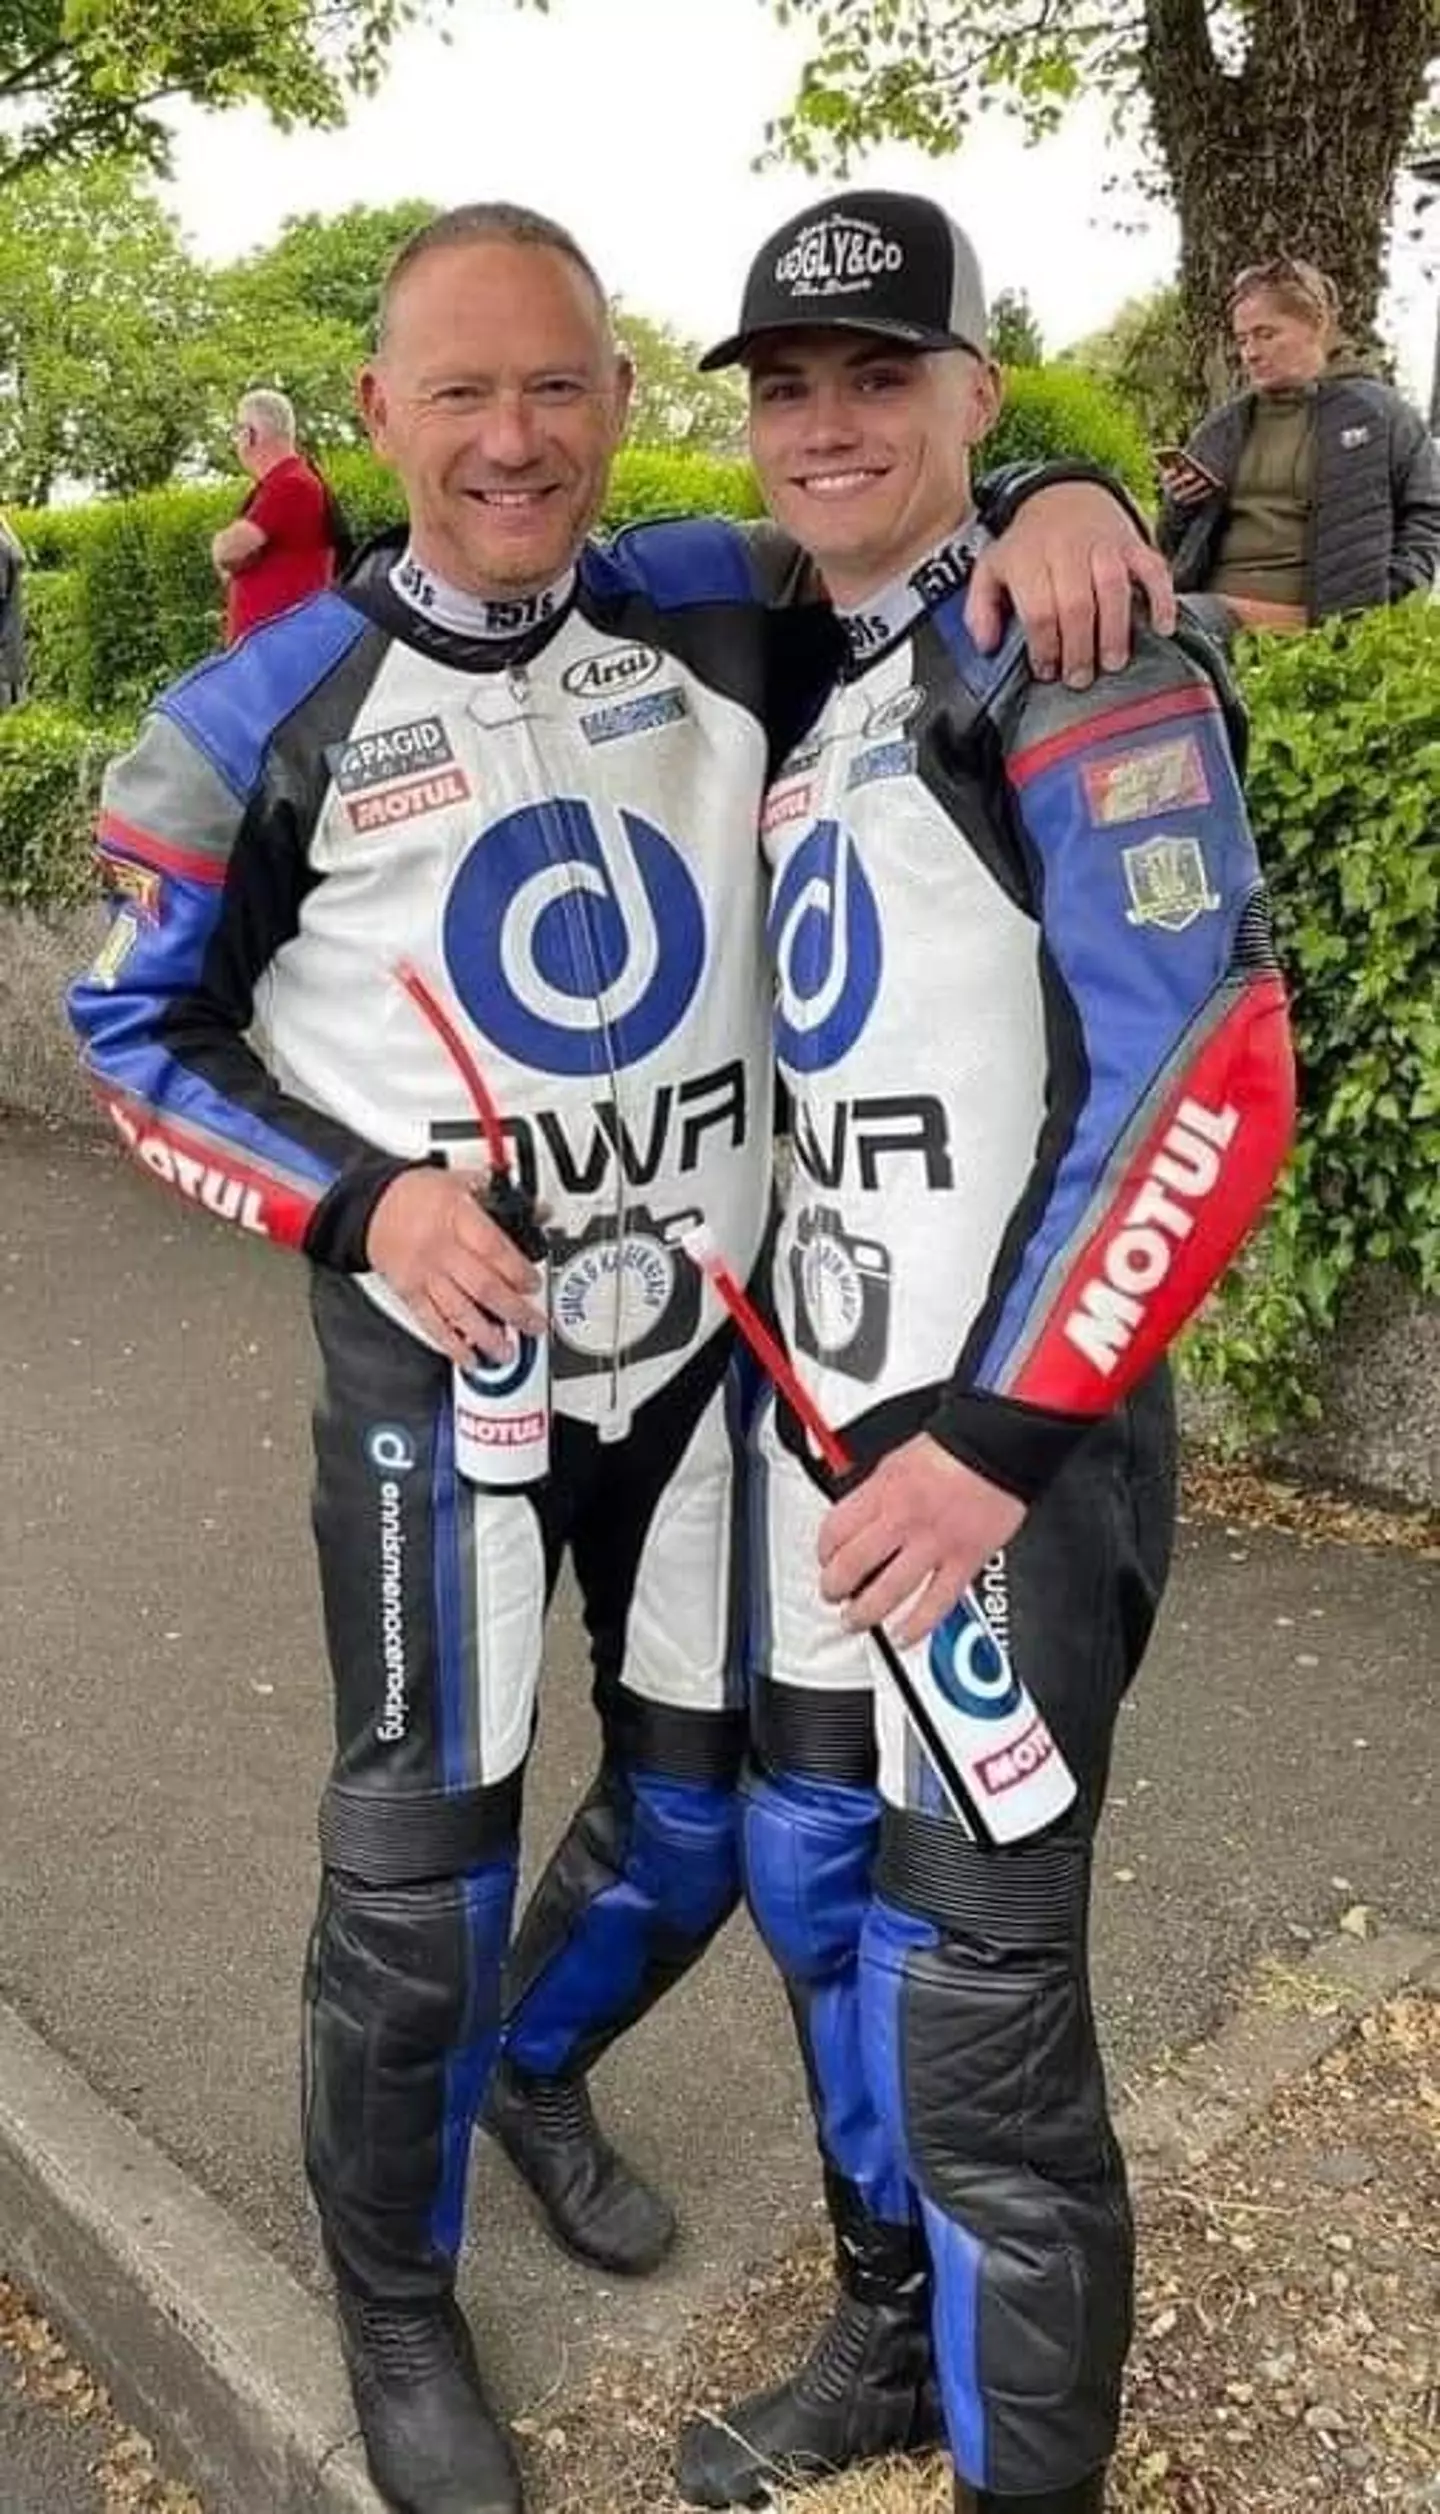 The father-son duo were tragically killed in an accident at the Isle of Man TT Races.